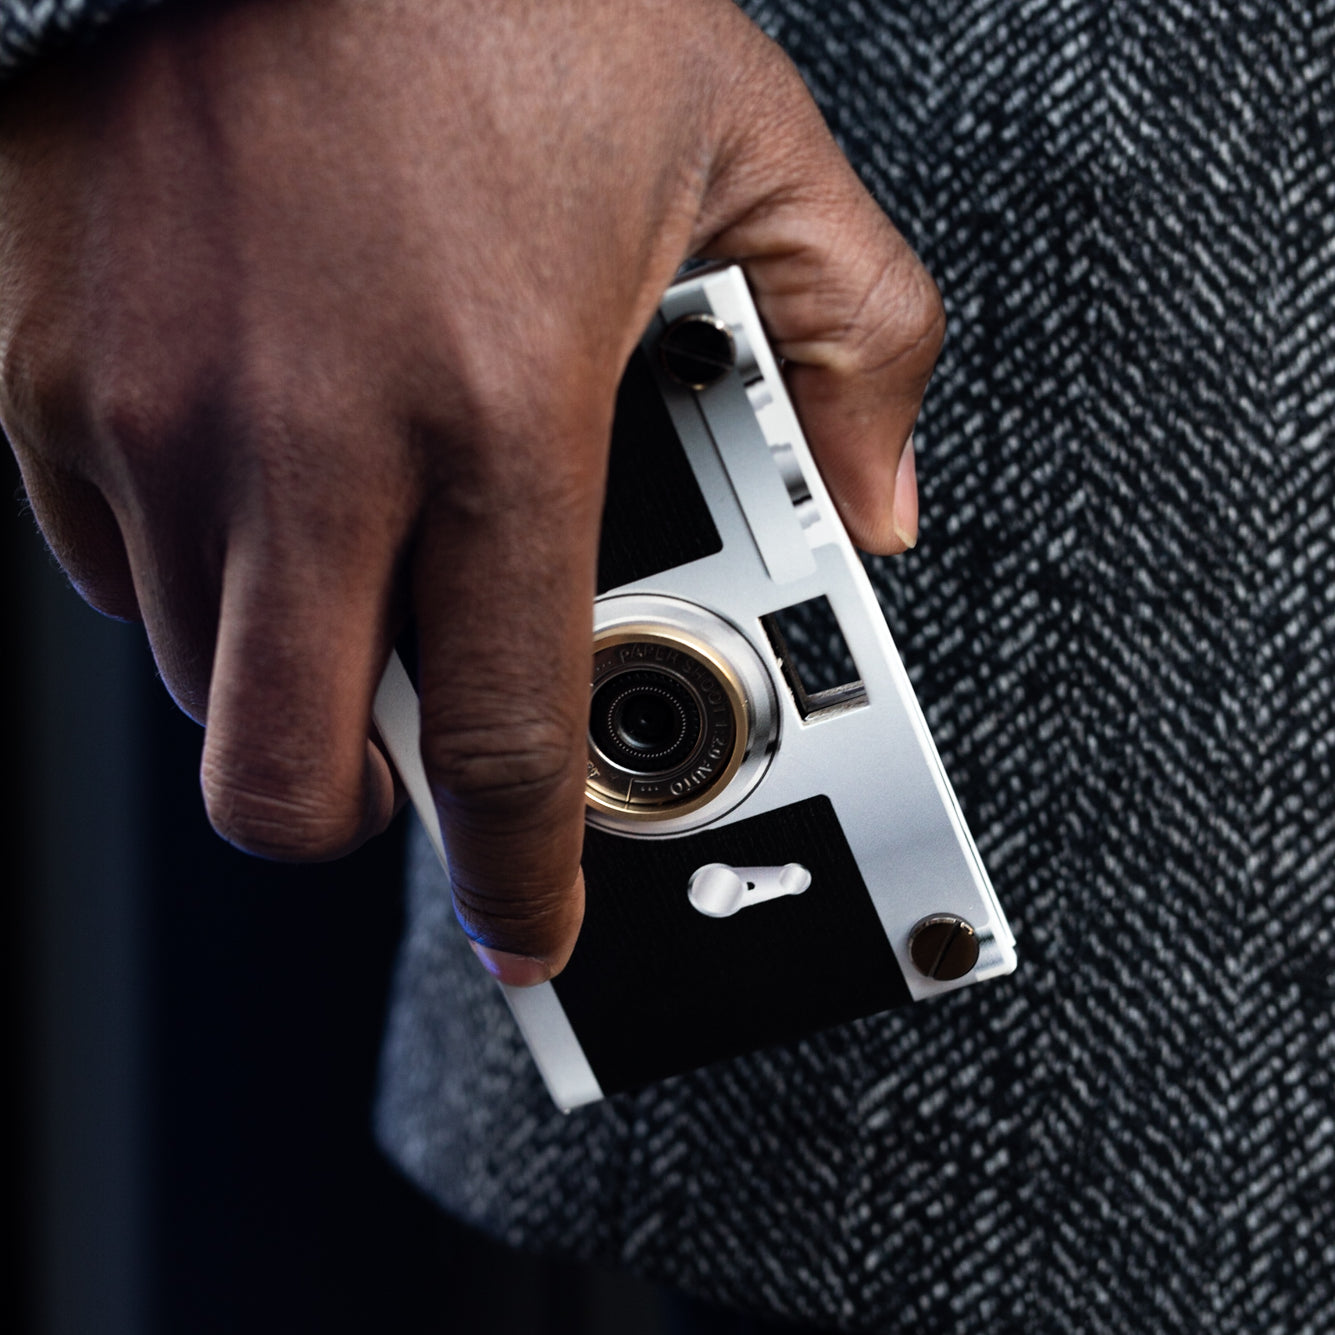 Shattering Rumors About the Paper Shoot Camera - Paper Shoot Camera